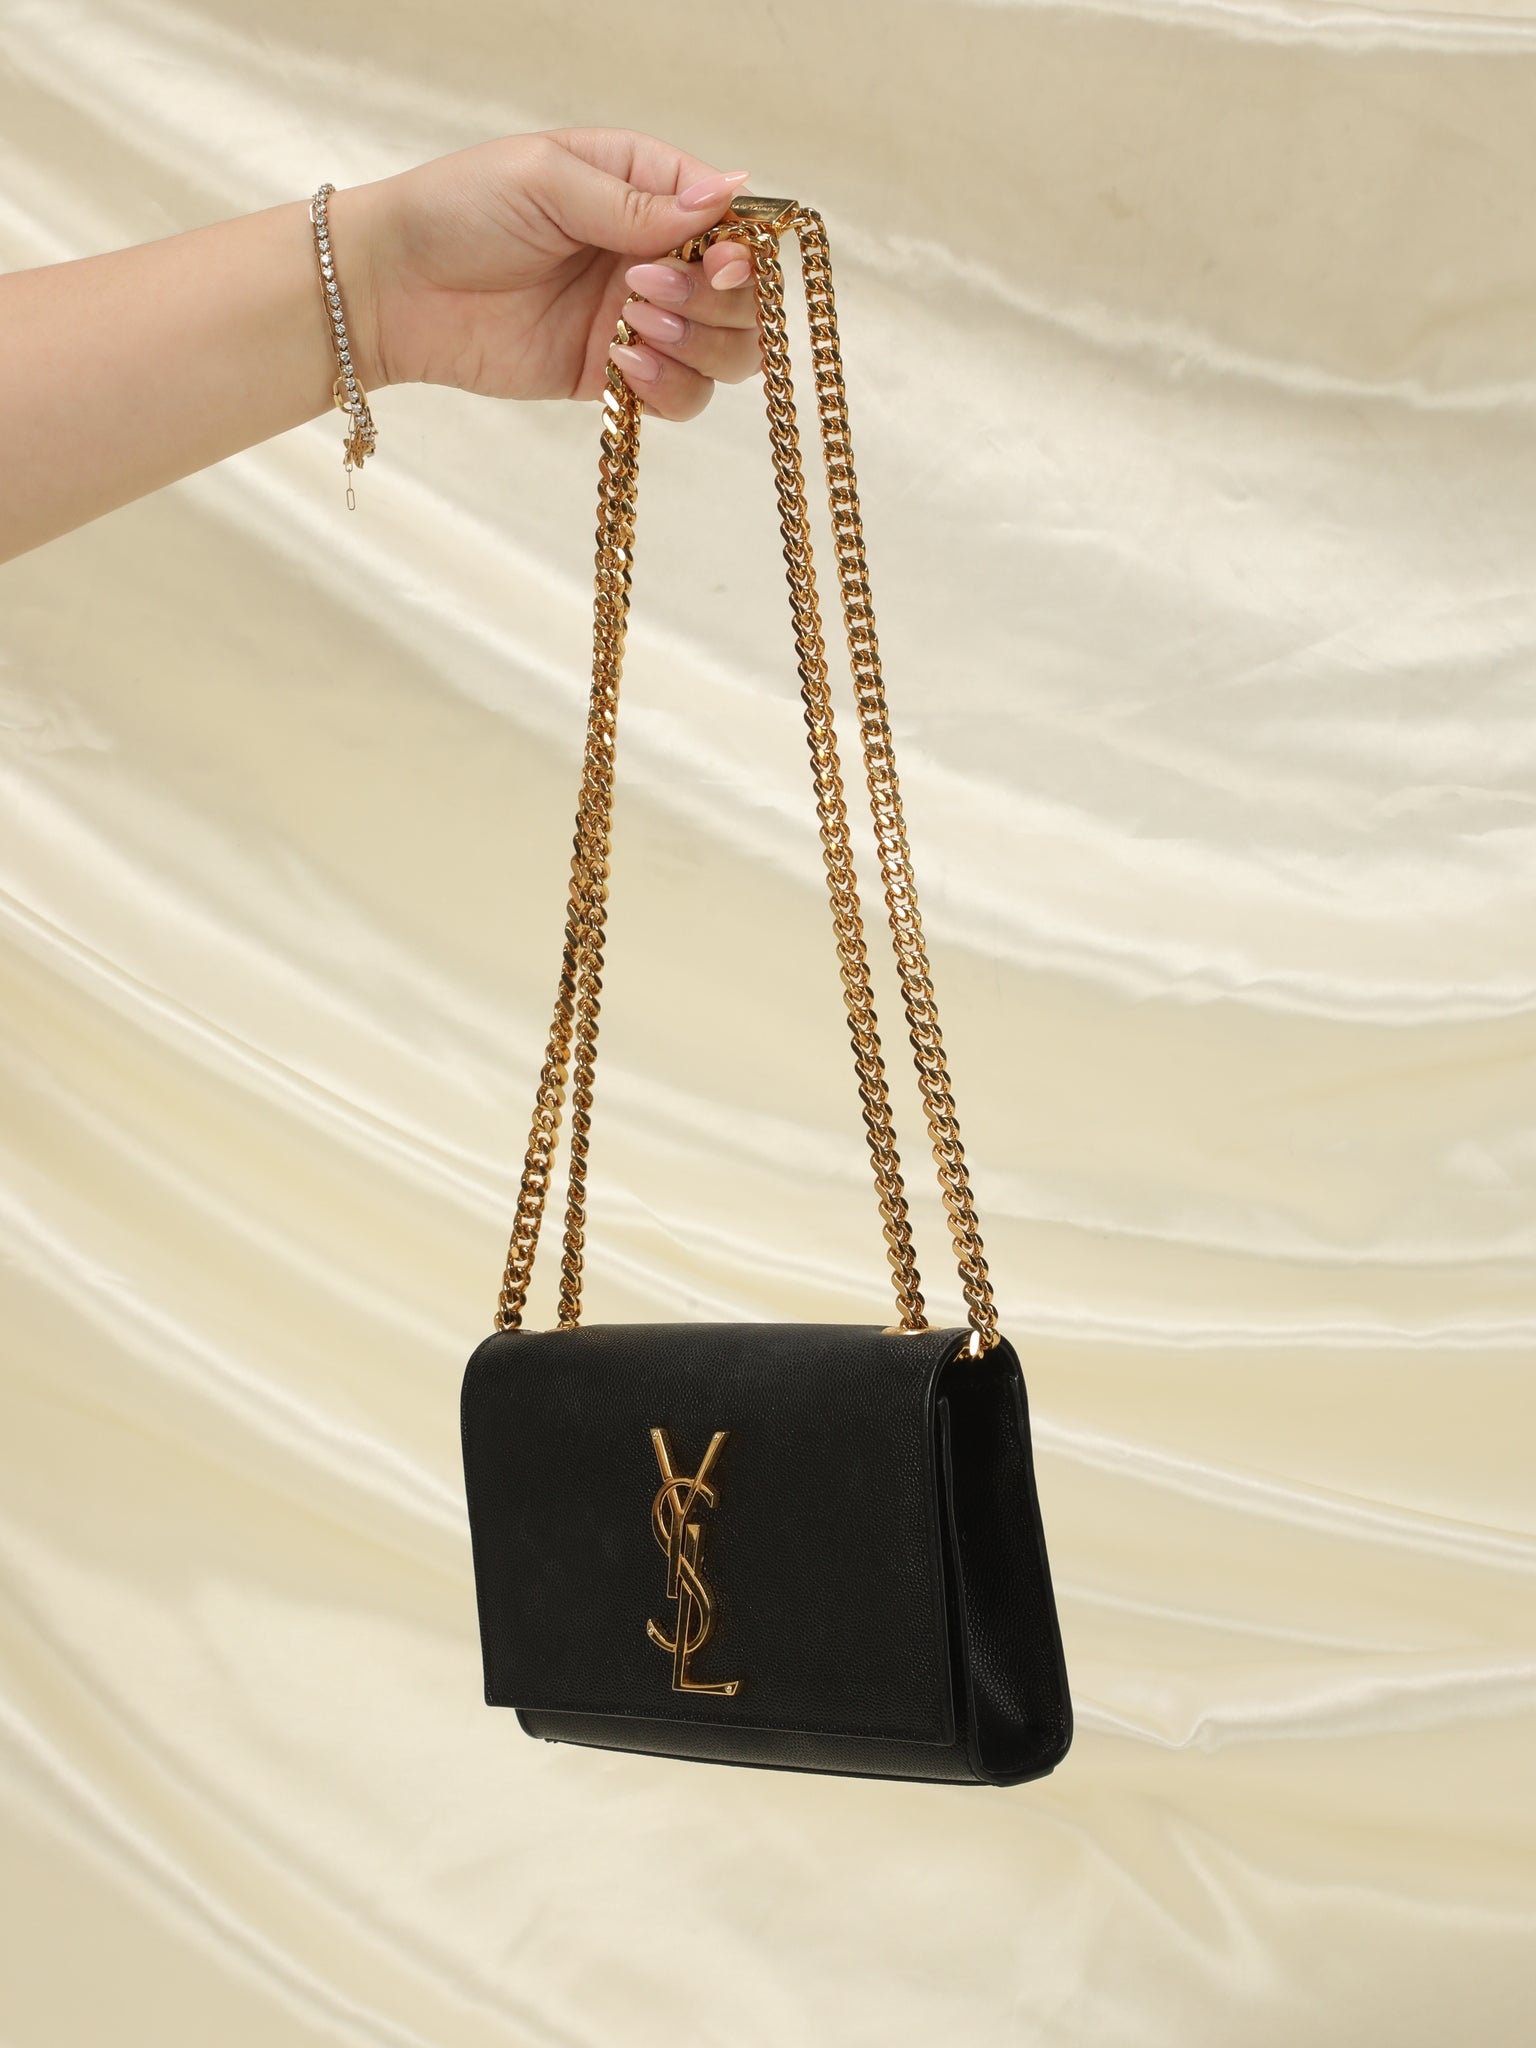 Saint Laurent Kate Small YSL Crossbody Bag in Grained Leather | Neiman  Marcus